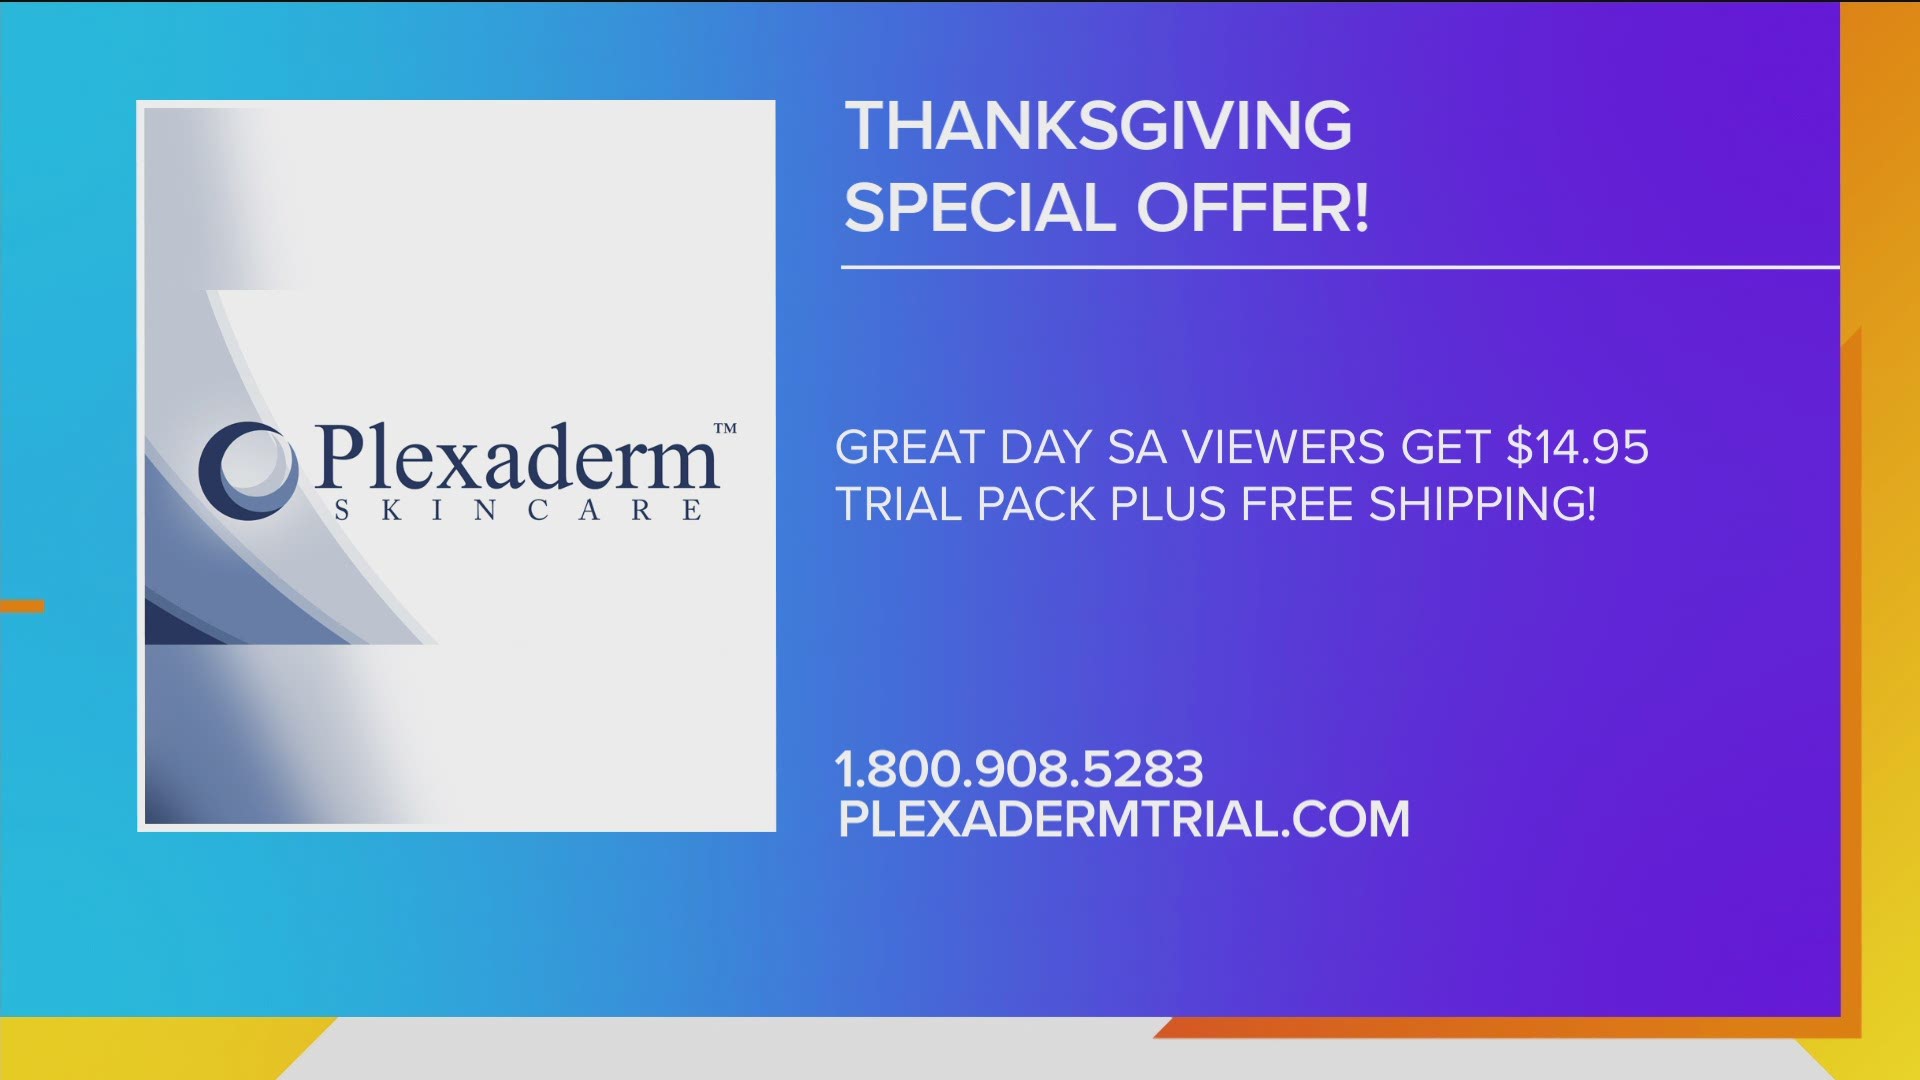 Plexaderm shows you how their anti-aging serum reverses signs of aging.